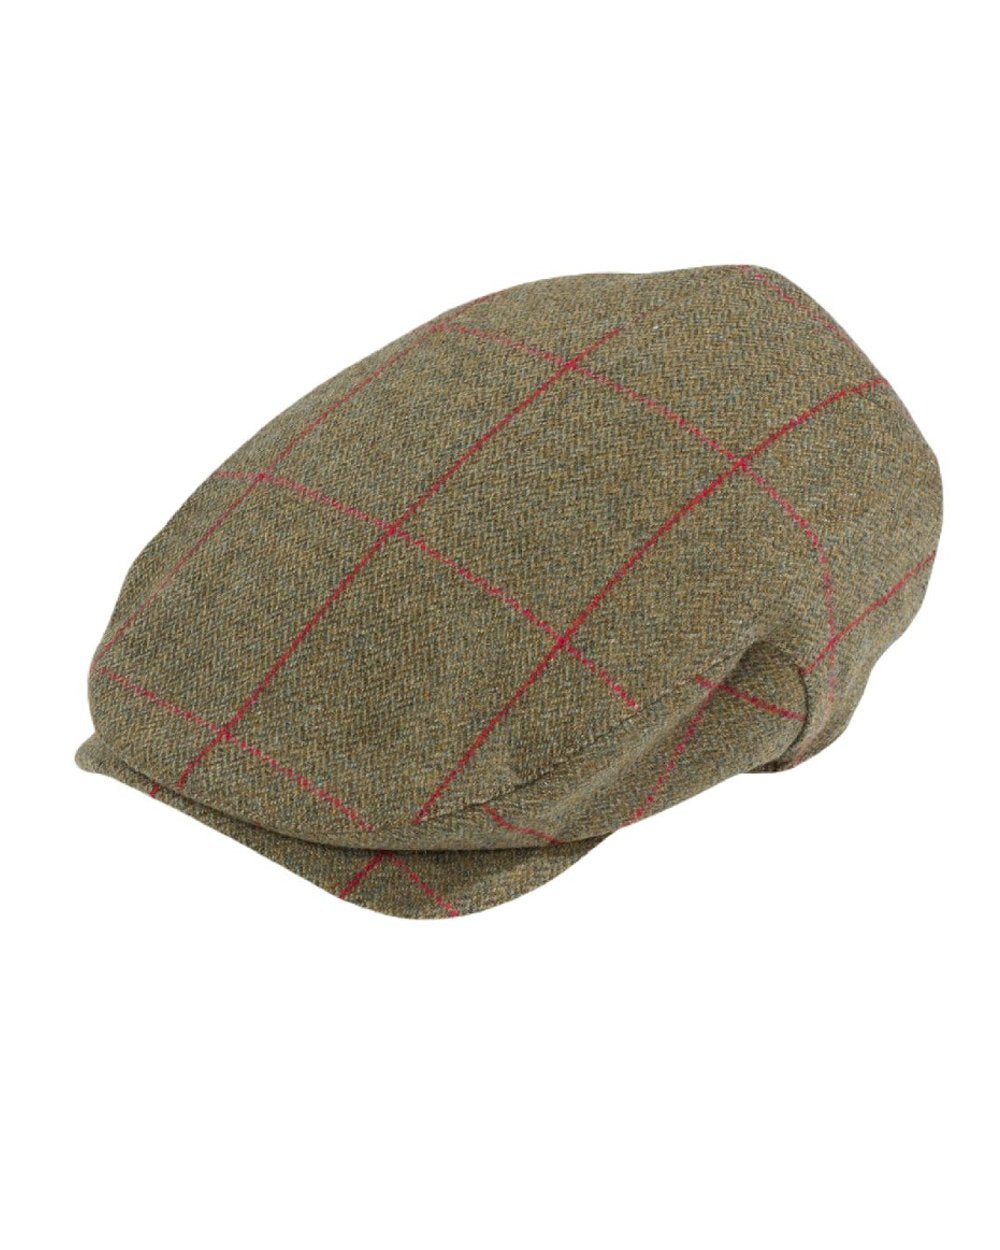 Men's Donegal Tweed Flat Cap - Traditional Style, Modern Fashion Item - Blue